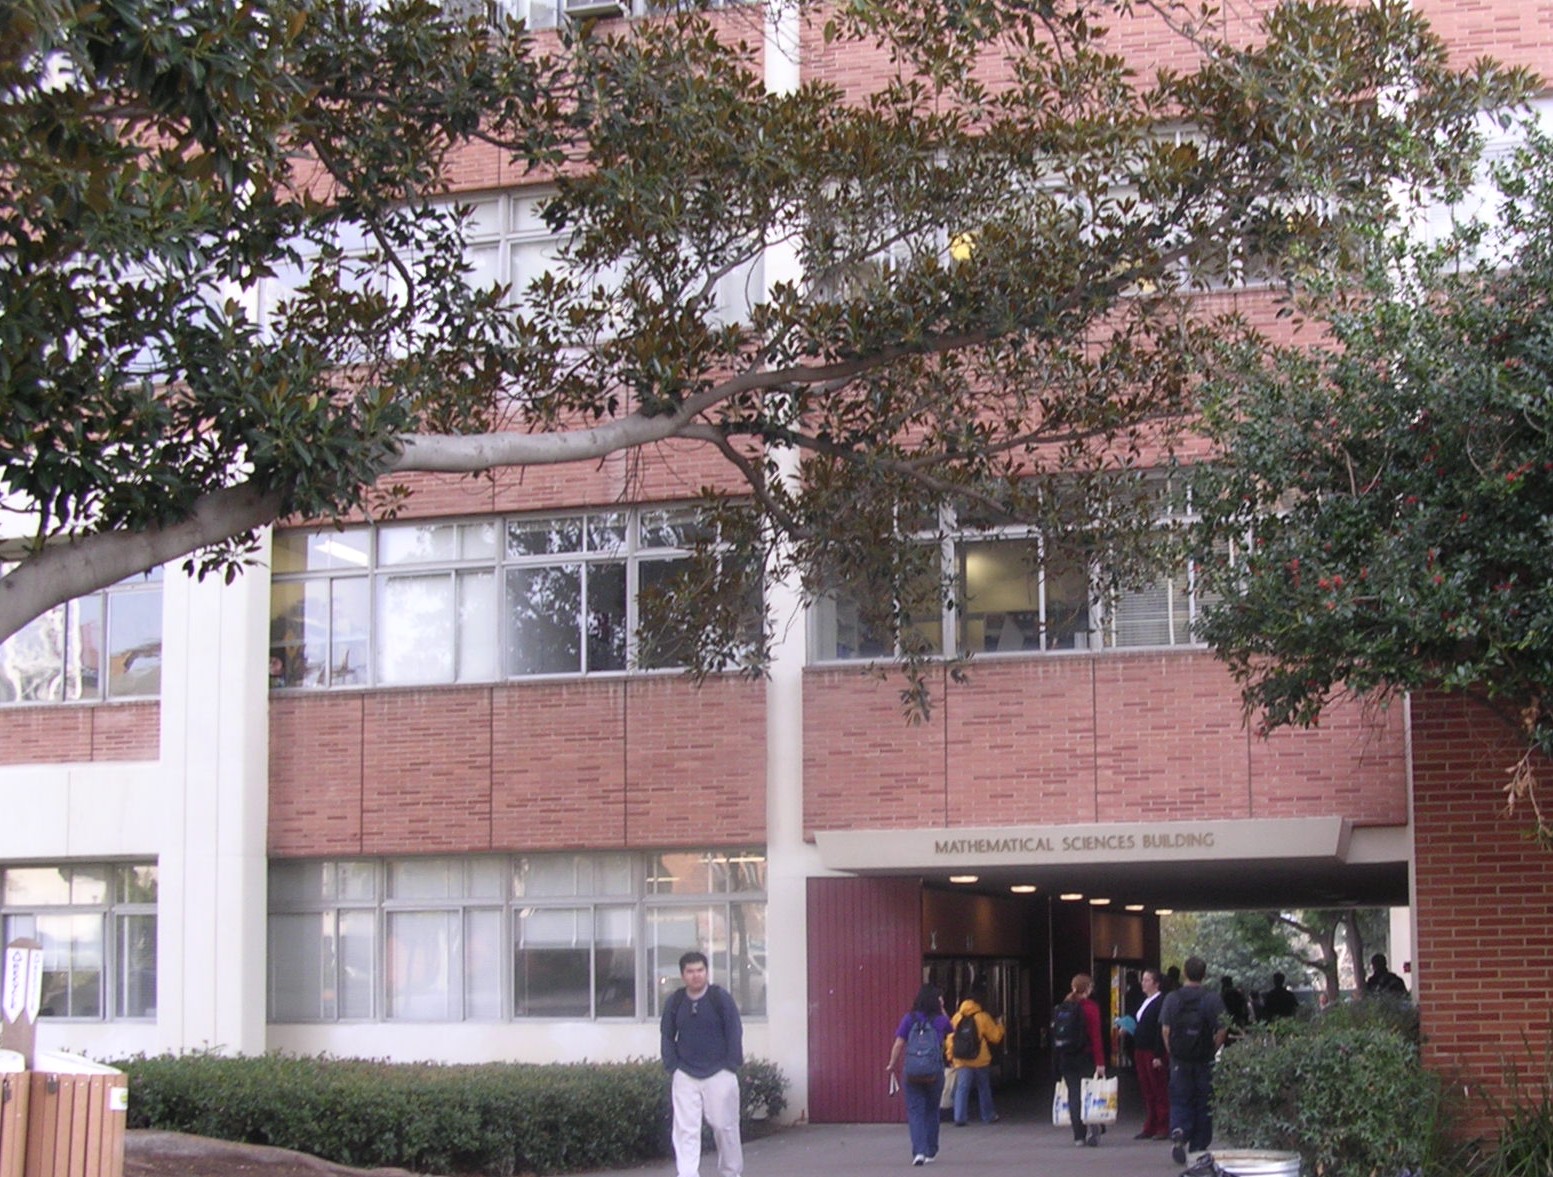 Breezeway entrance to the Mathematical Sciences Building (from the north)